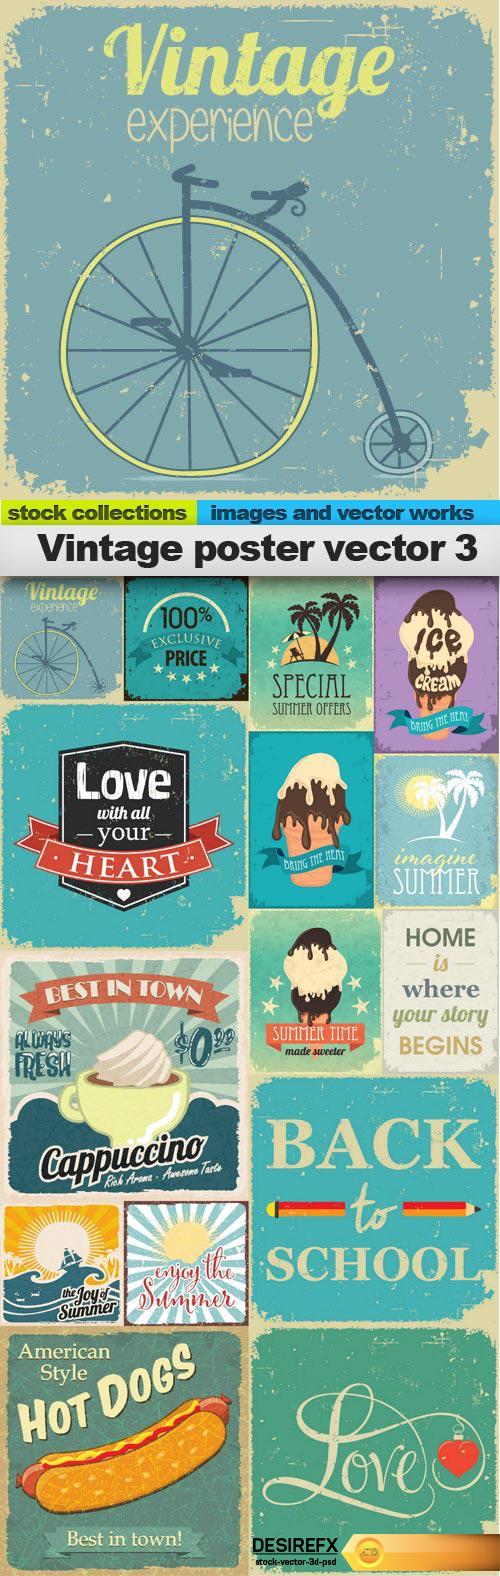 Vintage poster vector 3, 15 x EPS